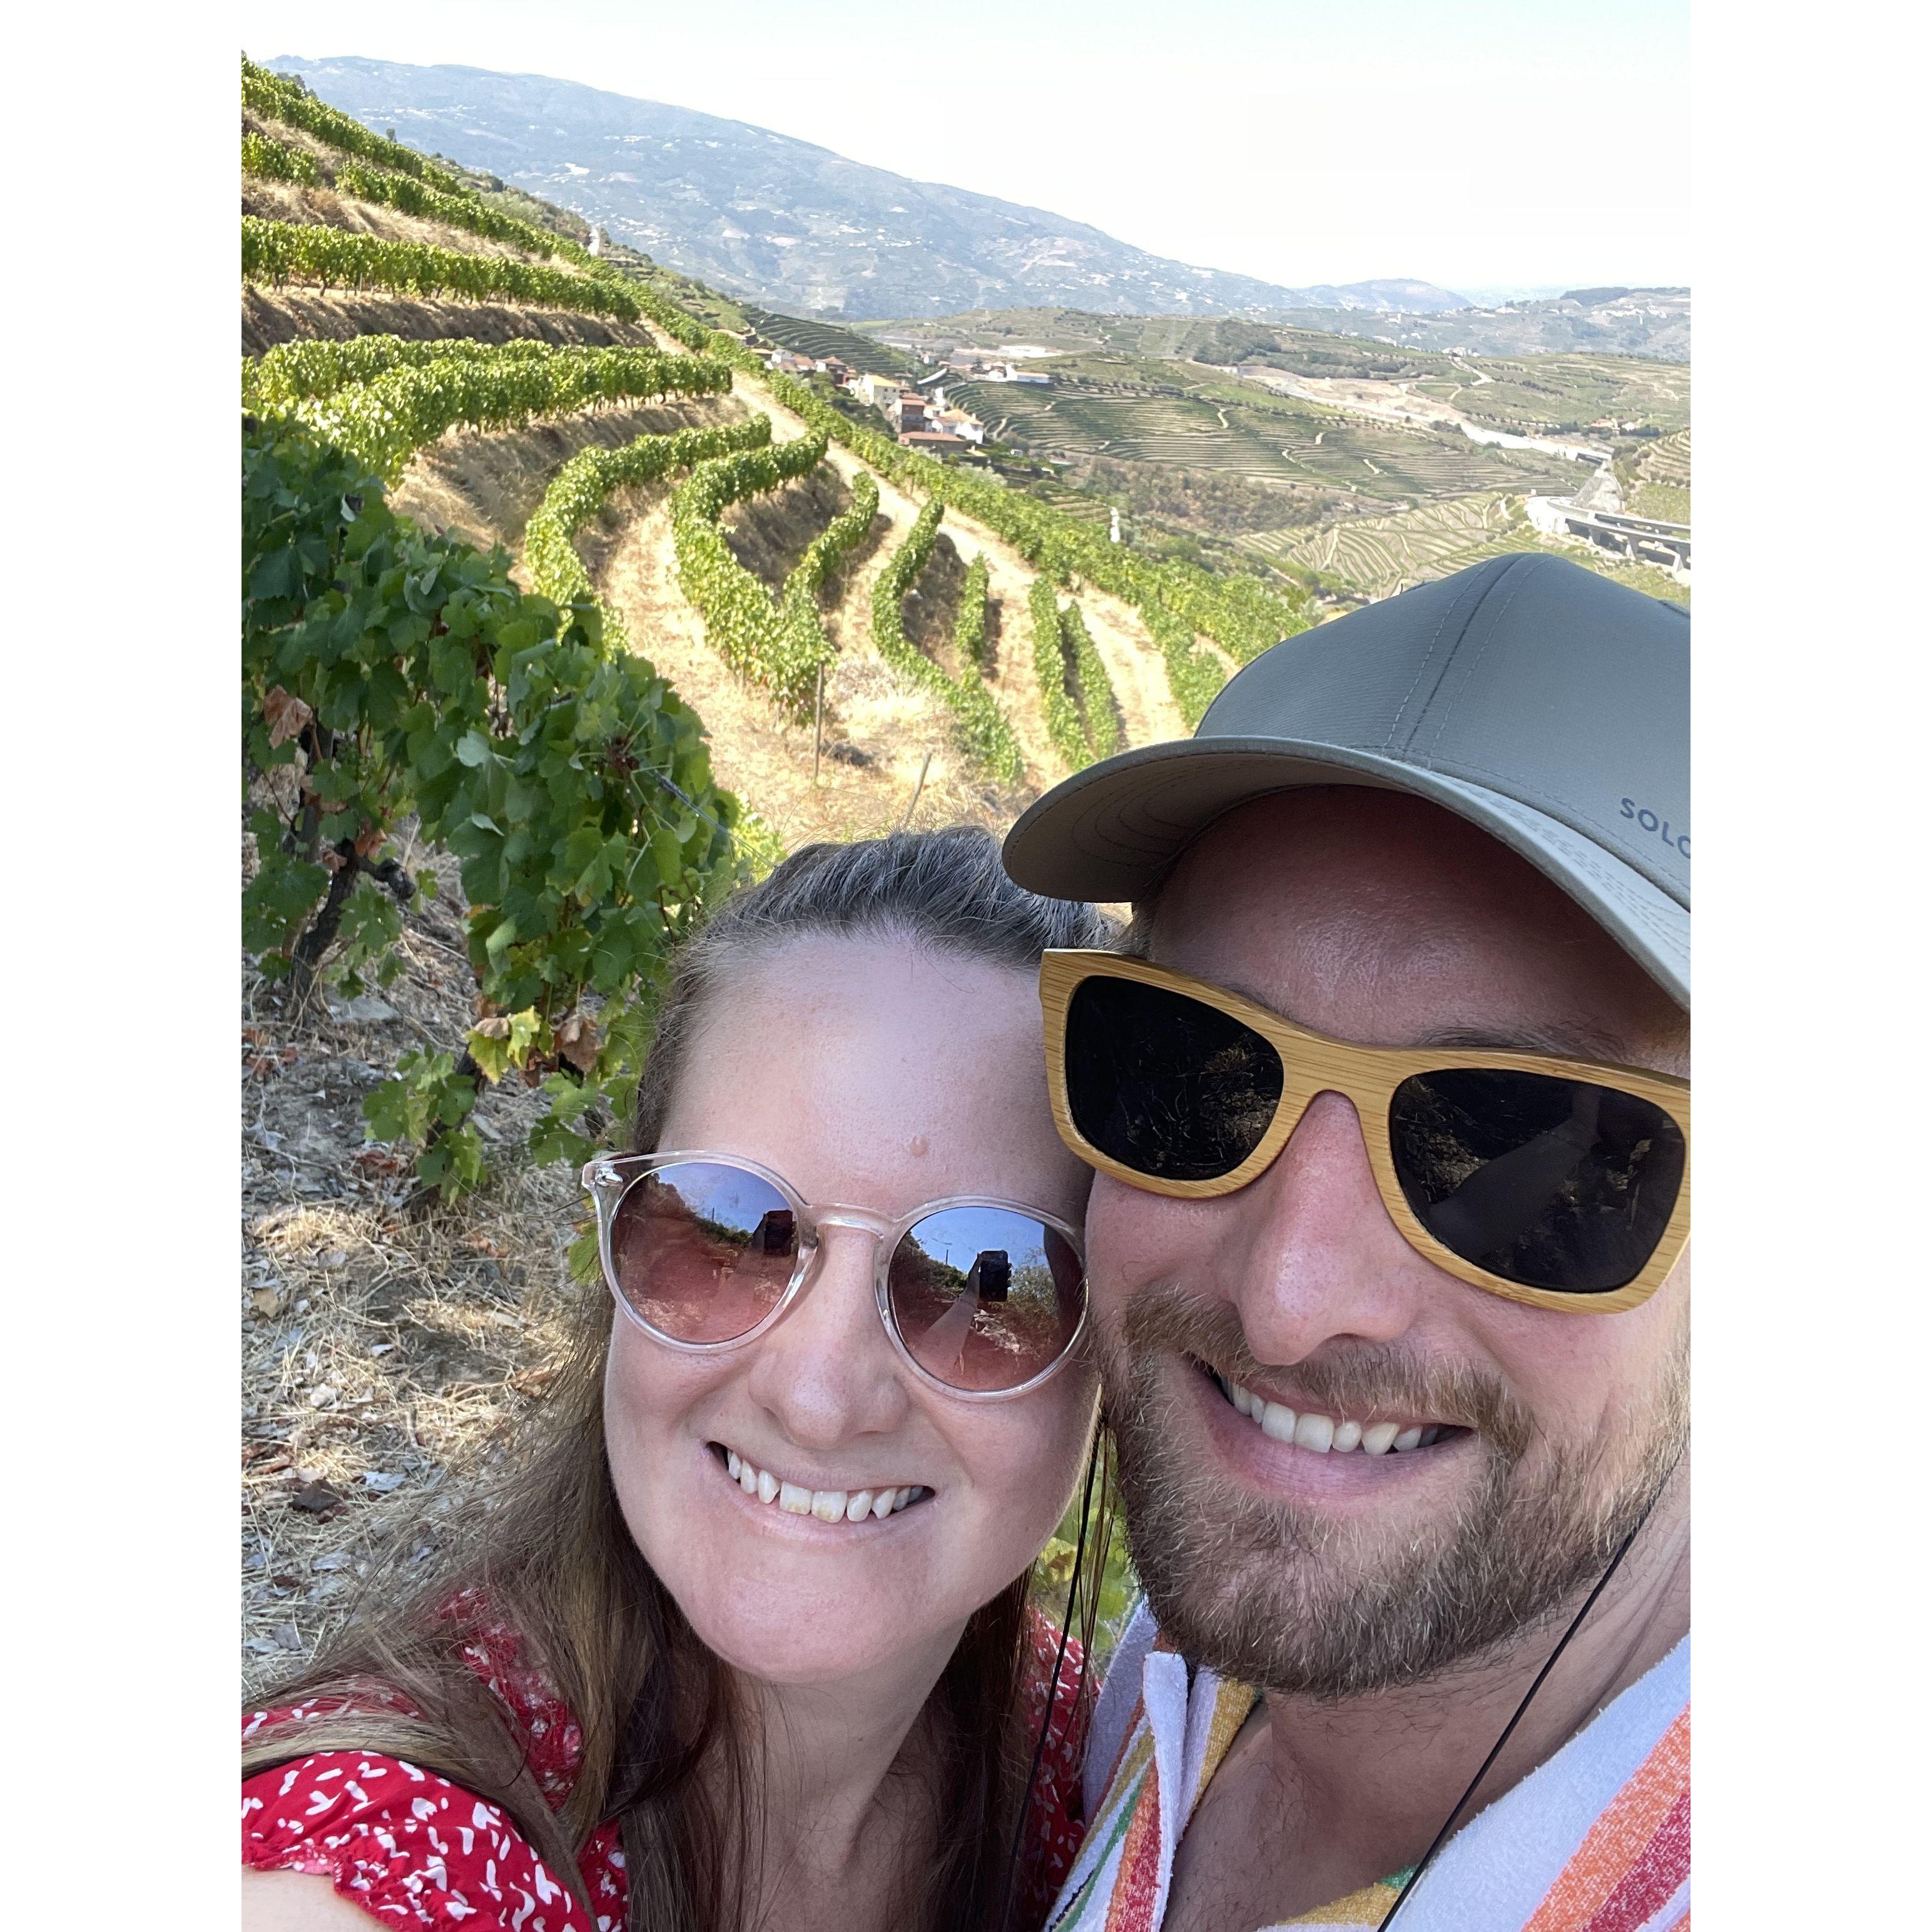 On a vineyard tour in Douro Valley, Portugal (the home of port, Katy's favorite drink)